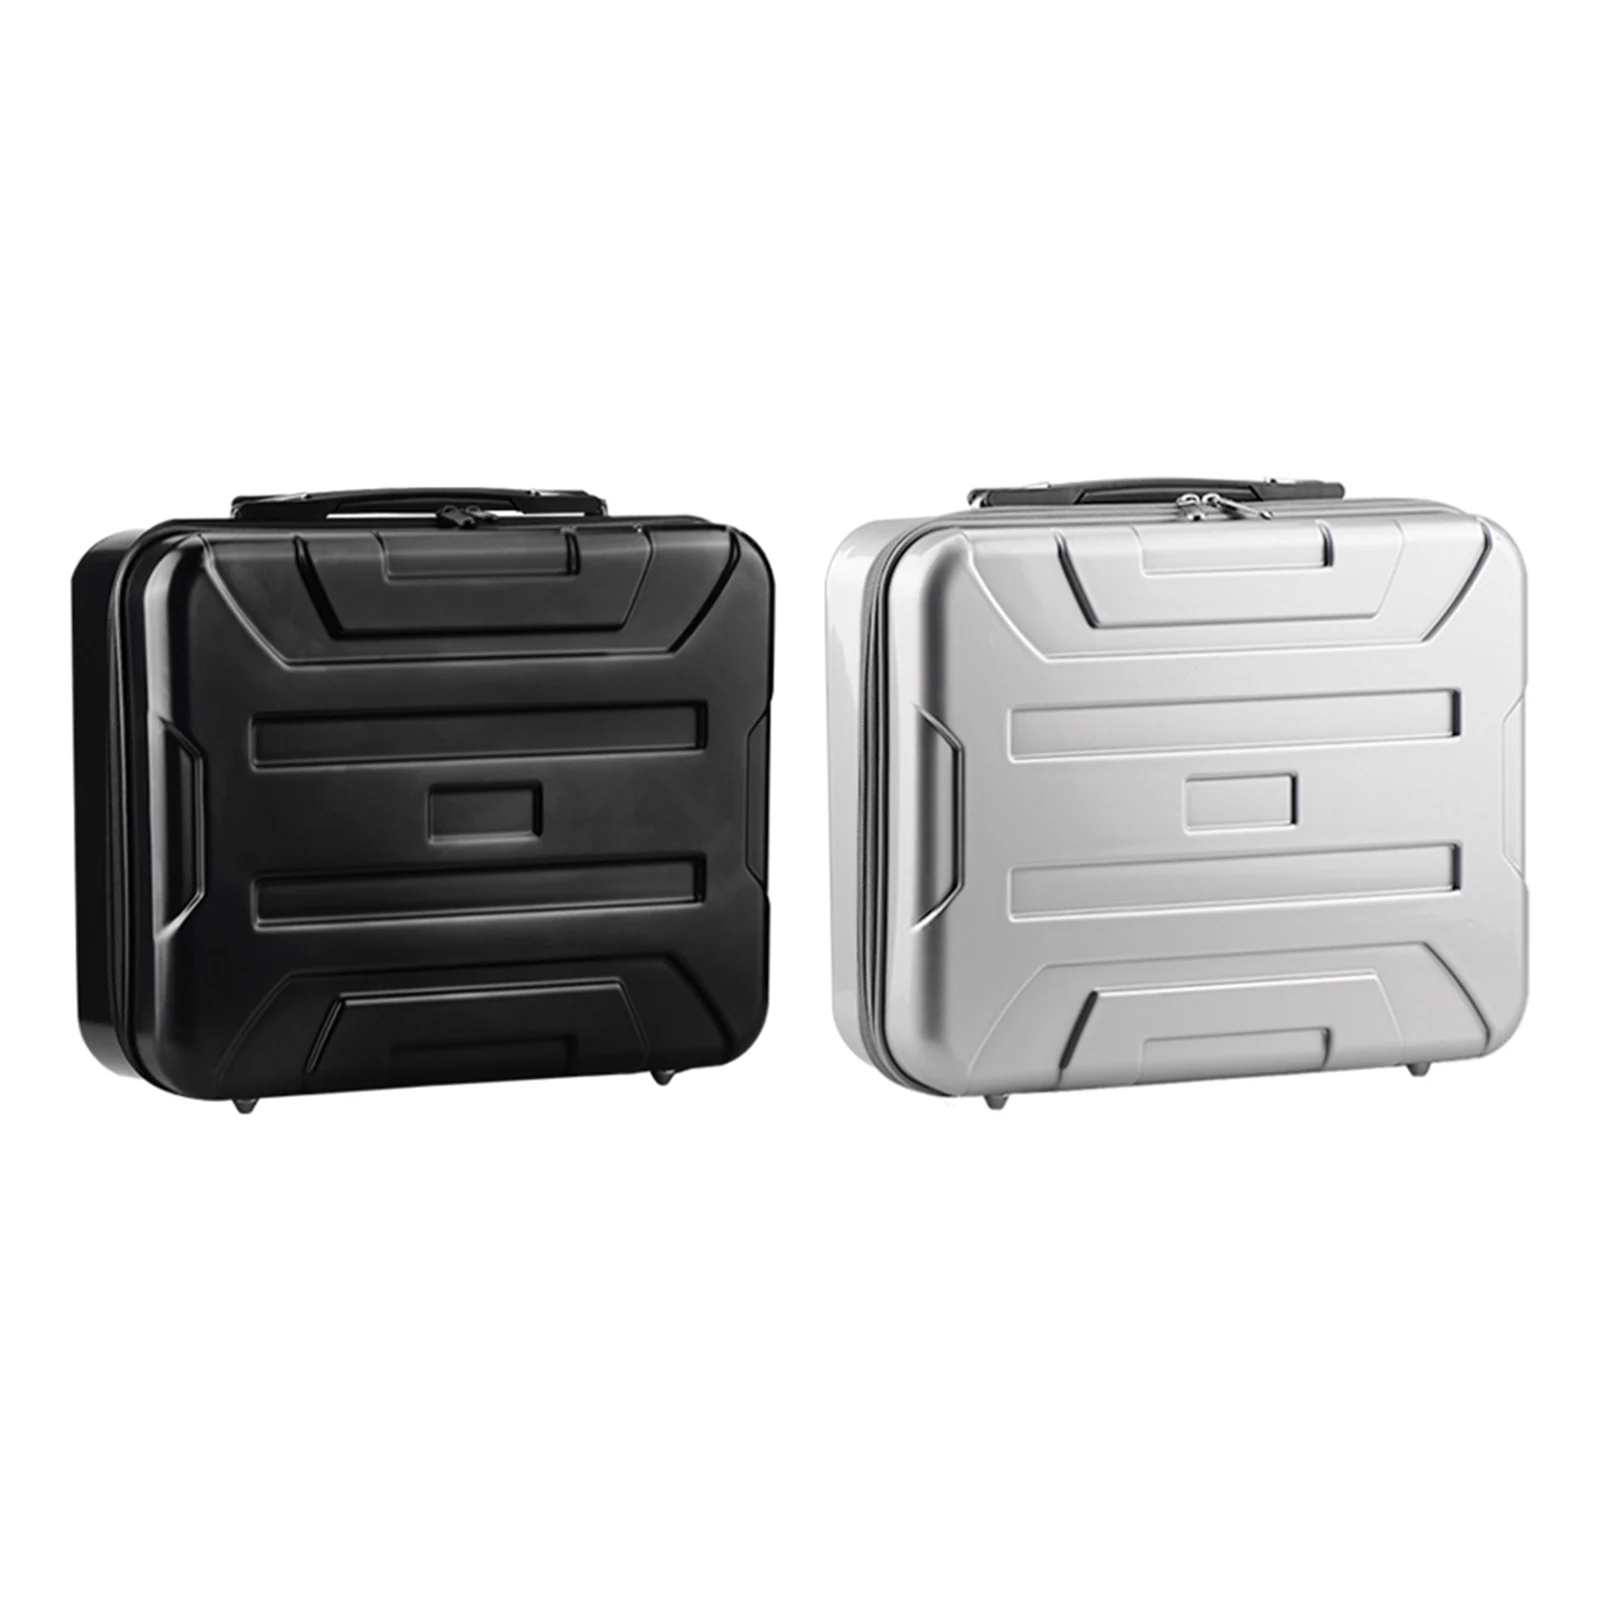 Professional Carrying Case Bag Waterproof Hard Shell For DJI FPV Combo Quadcopter Remote Controller 14.17 x 11.02 x 6.29 inches